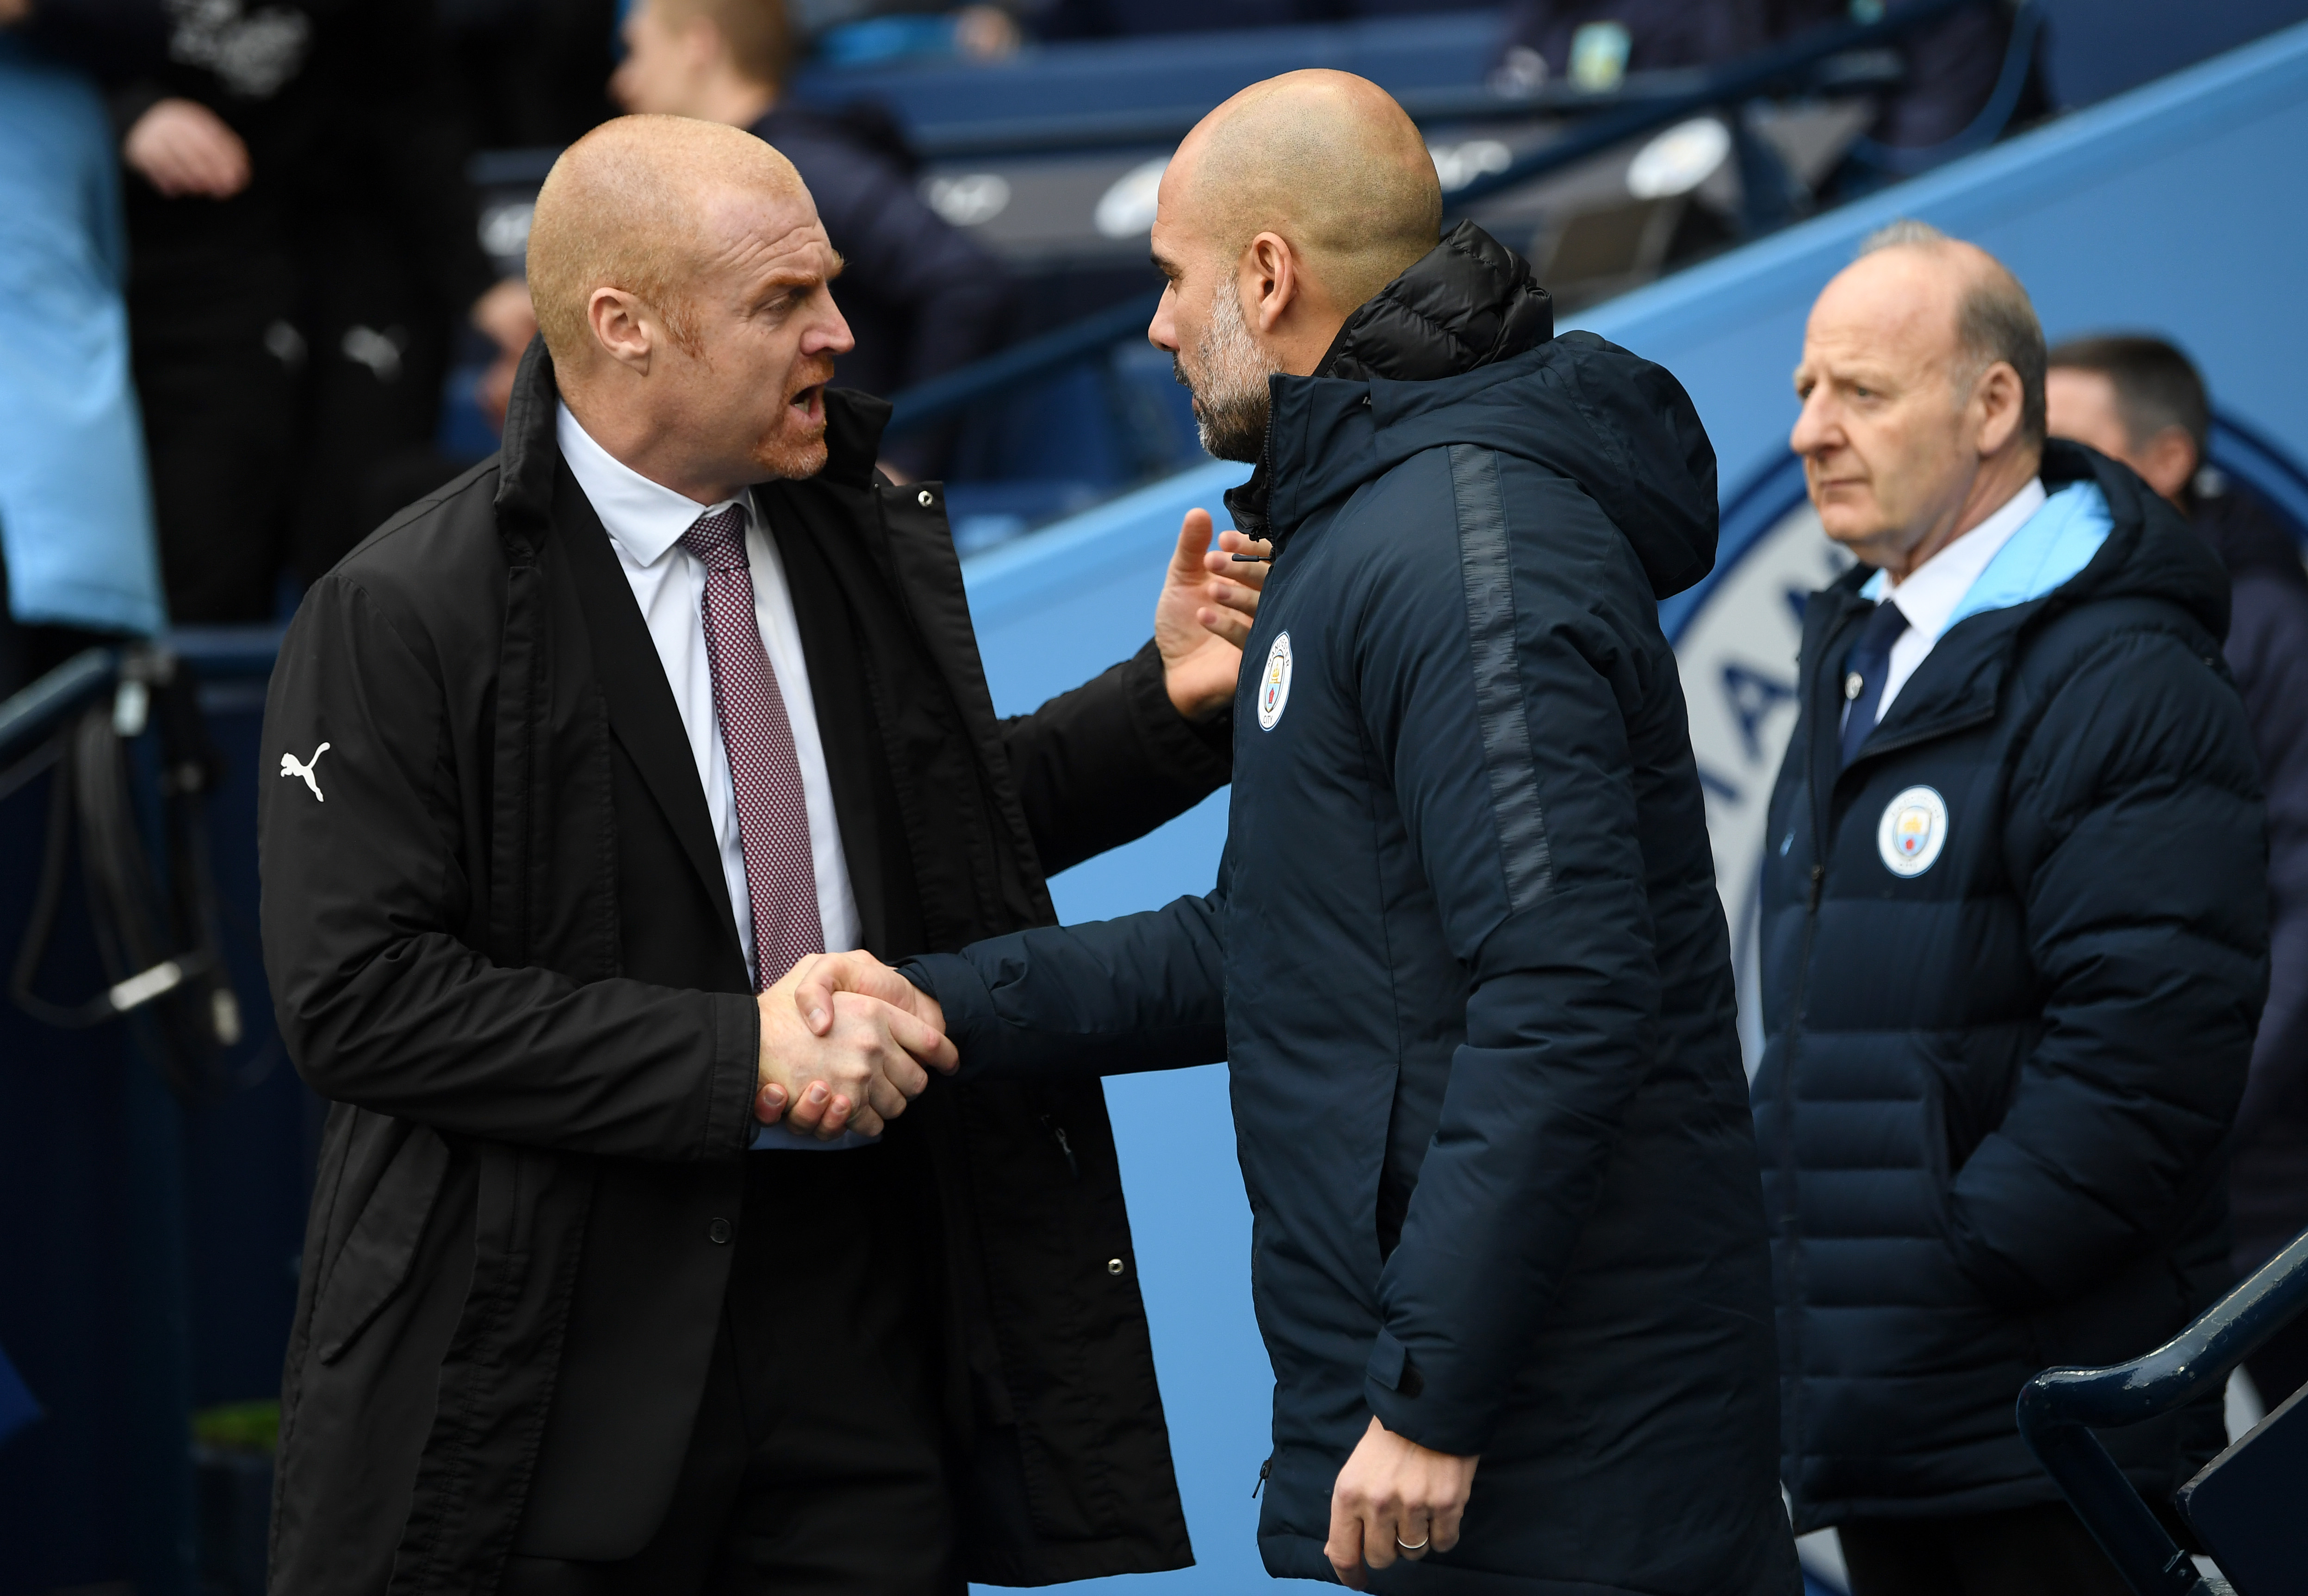 MANCHESTER, ENGLAND - JANUARY 26:  Josep Guardiola, Manager of Manchester City greets Sean Dyche, Manager of Burnley prior to the FA Cup Fourth Round match between Manchester City and Burnley at Etihad Stadium on January 26, 2019 in Manchester, United Kingdom.  (Photo by Michael Regan/Getty Images)